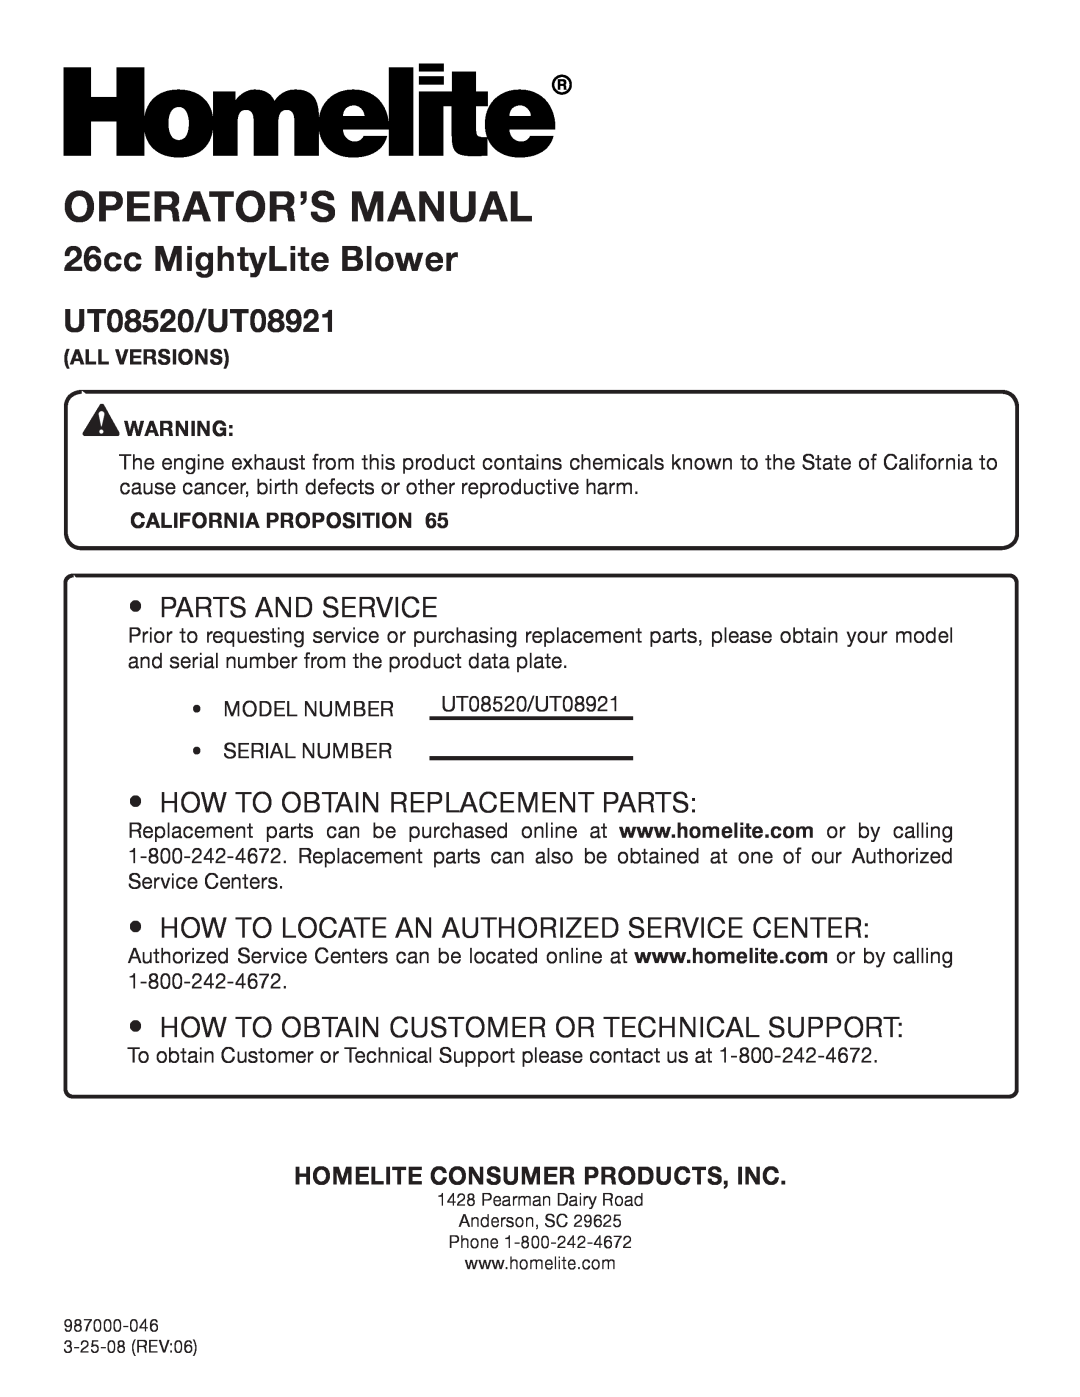 Homelite UT08520 manual Homelite Consumer Products, Inc, California Proposition, Operator’S Manual, 26cc MightyLite Blower 